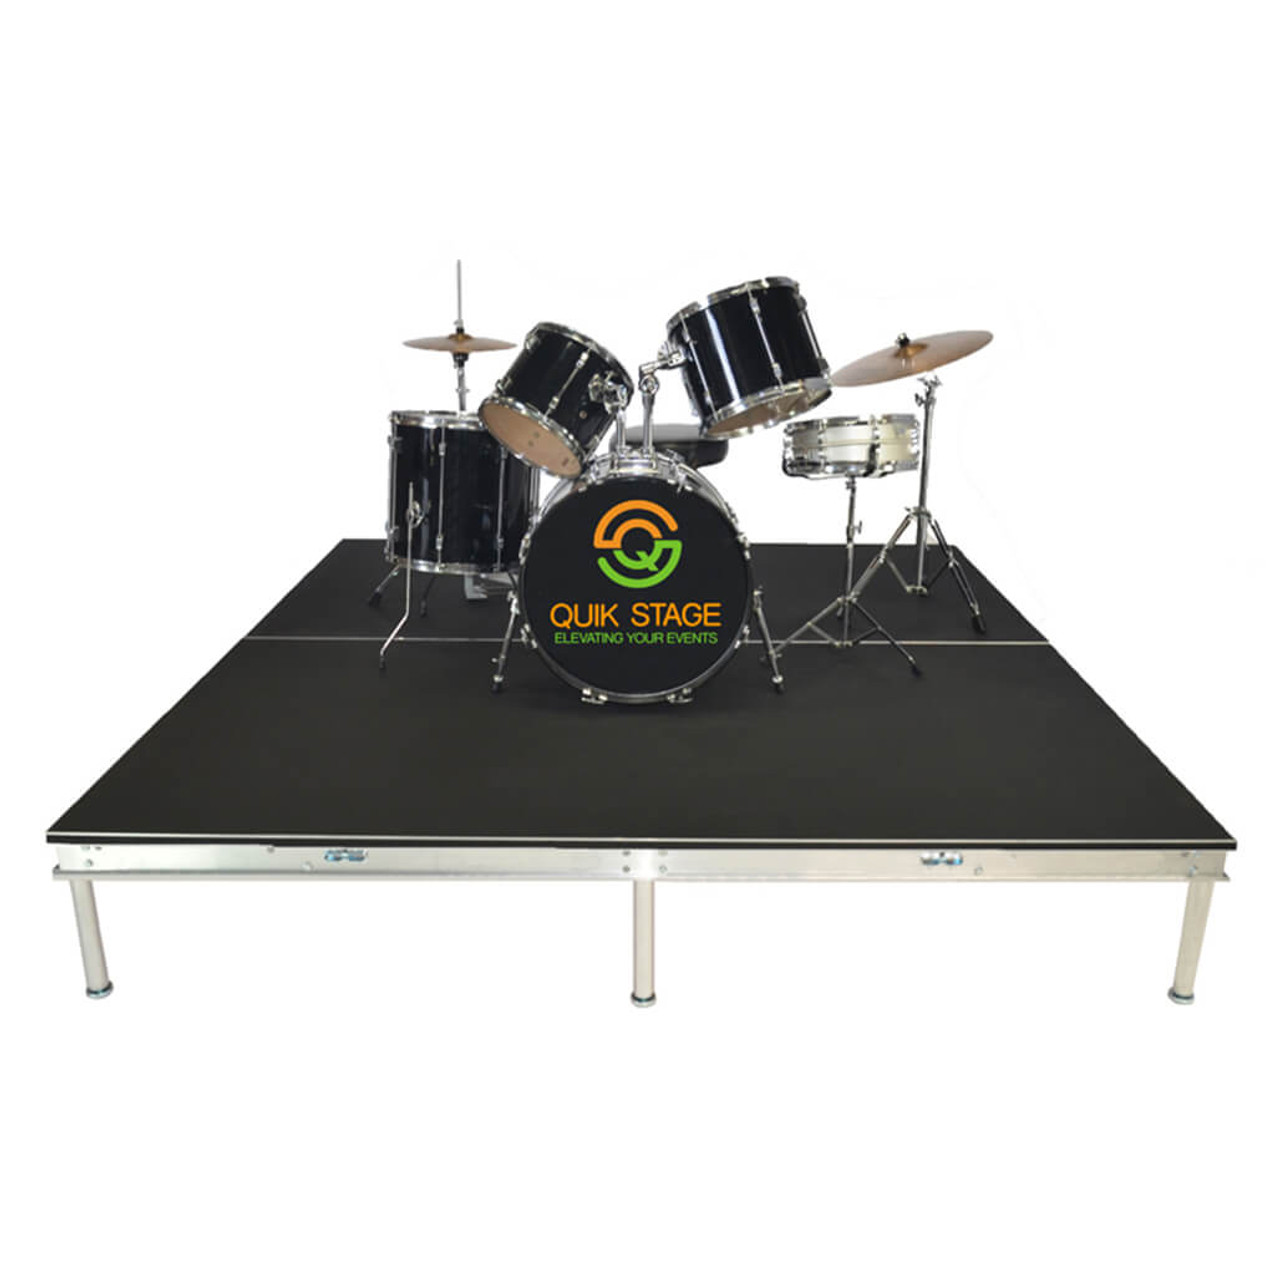 Quik Stage 16' x 32' High Portable Stage Package with Black Polyvinyl Non-Skid Surface. Additional Heights and Surfaces Available - Drum Riser without skirting